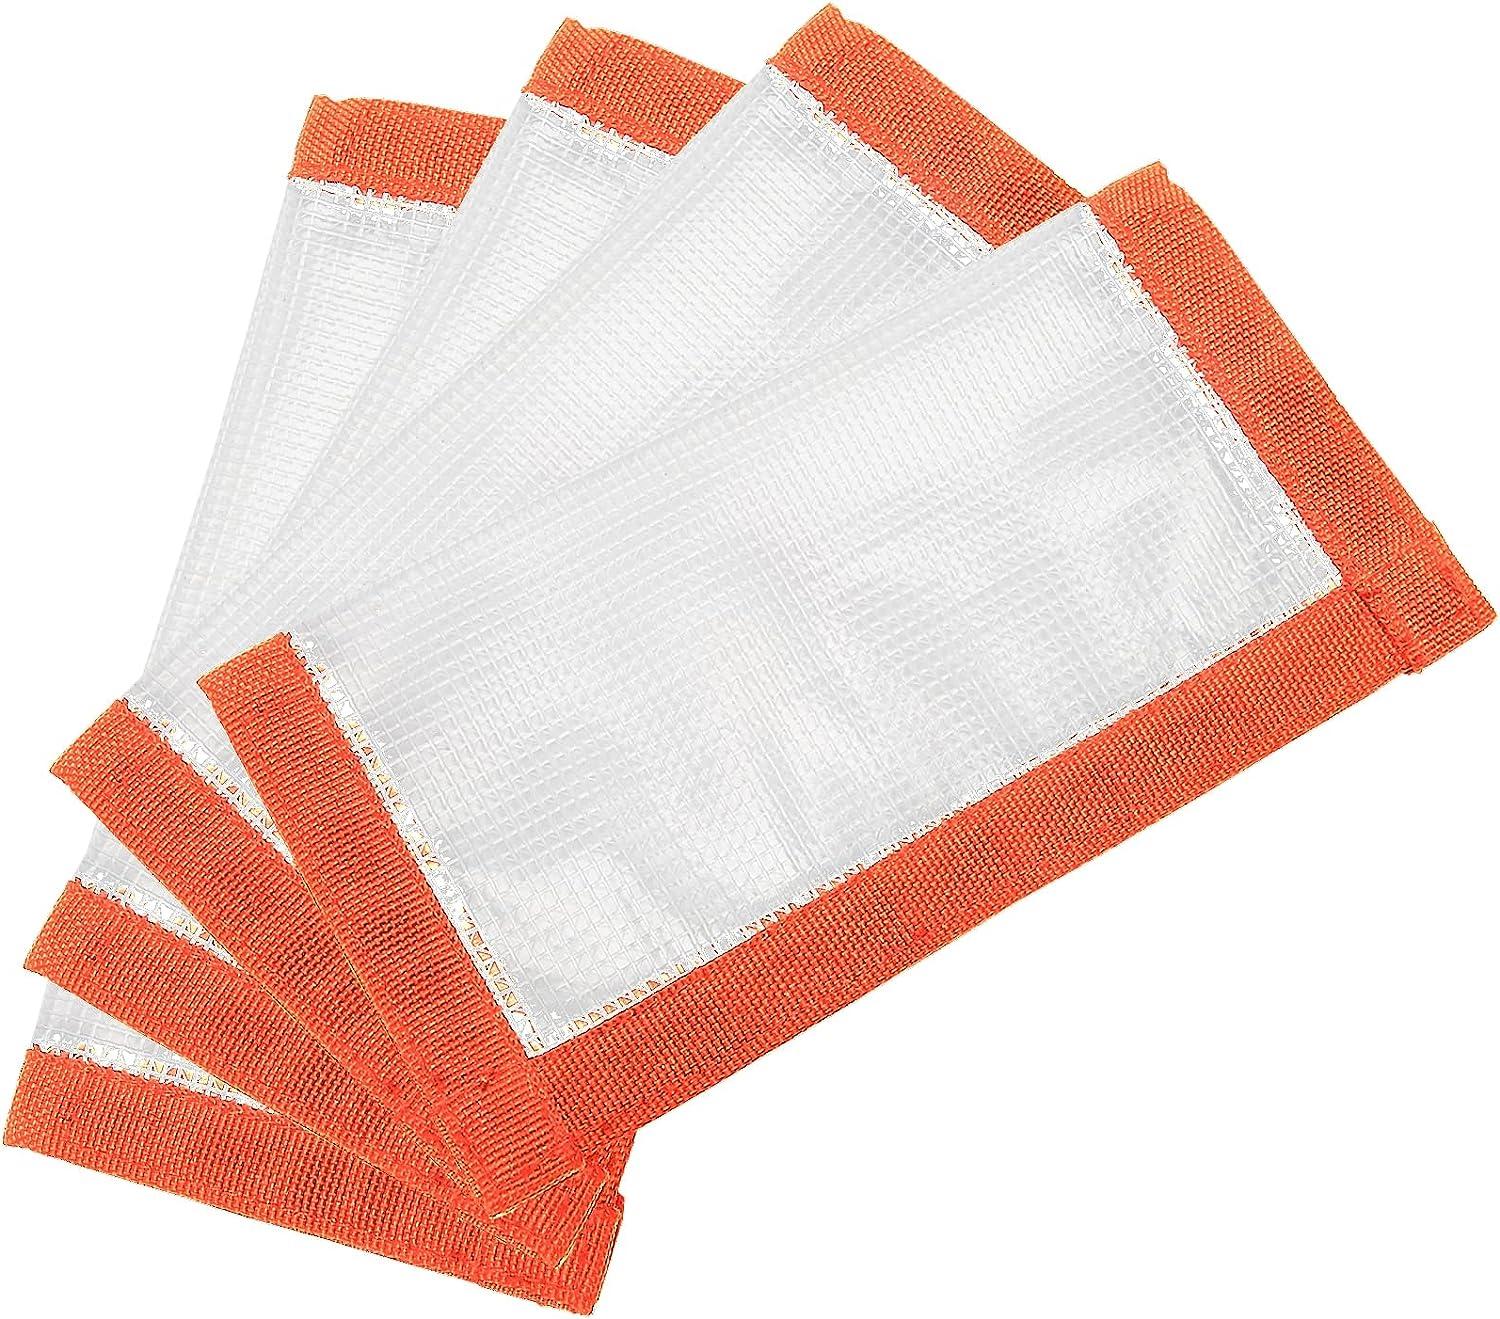 Fishing Lure Covers for Rod, Fabric Hook Protectors Wraps (Orange